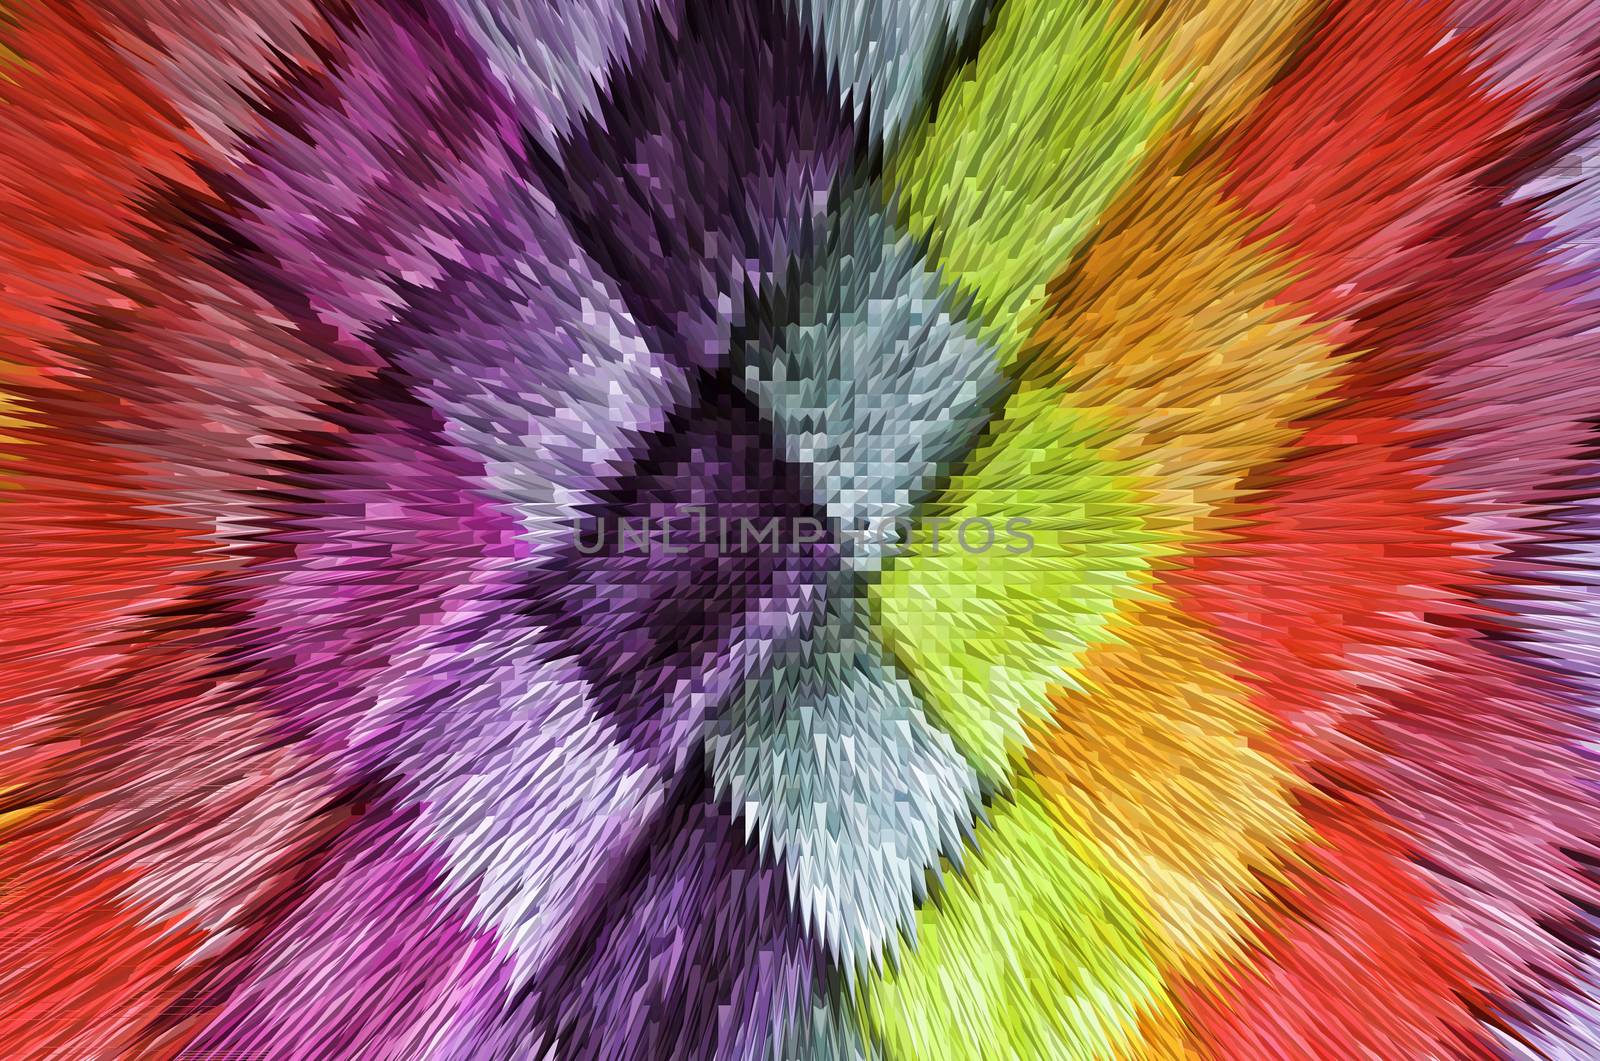  texture of colored fabric, Pyramid extrusion color background,  by KoliadzynskaIryna